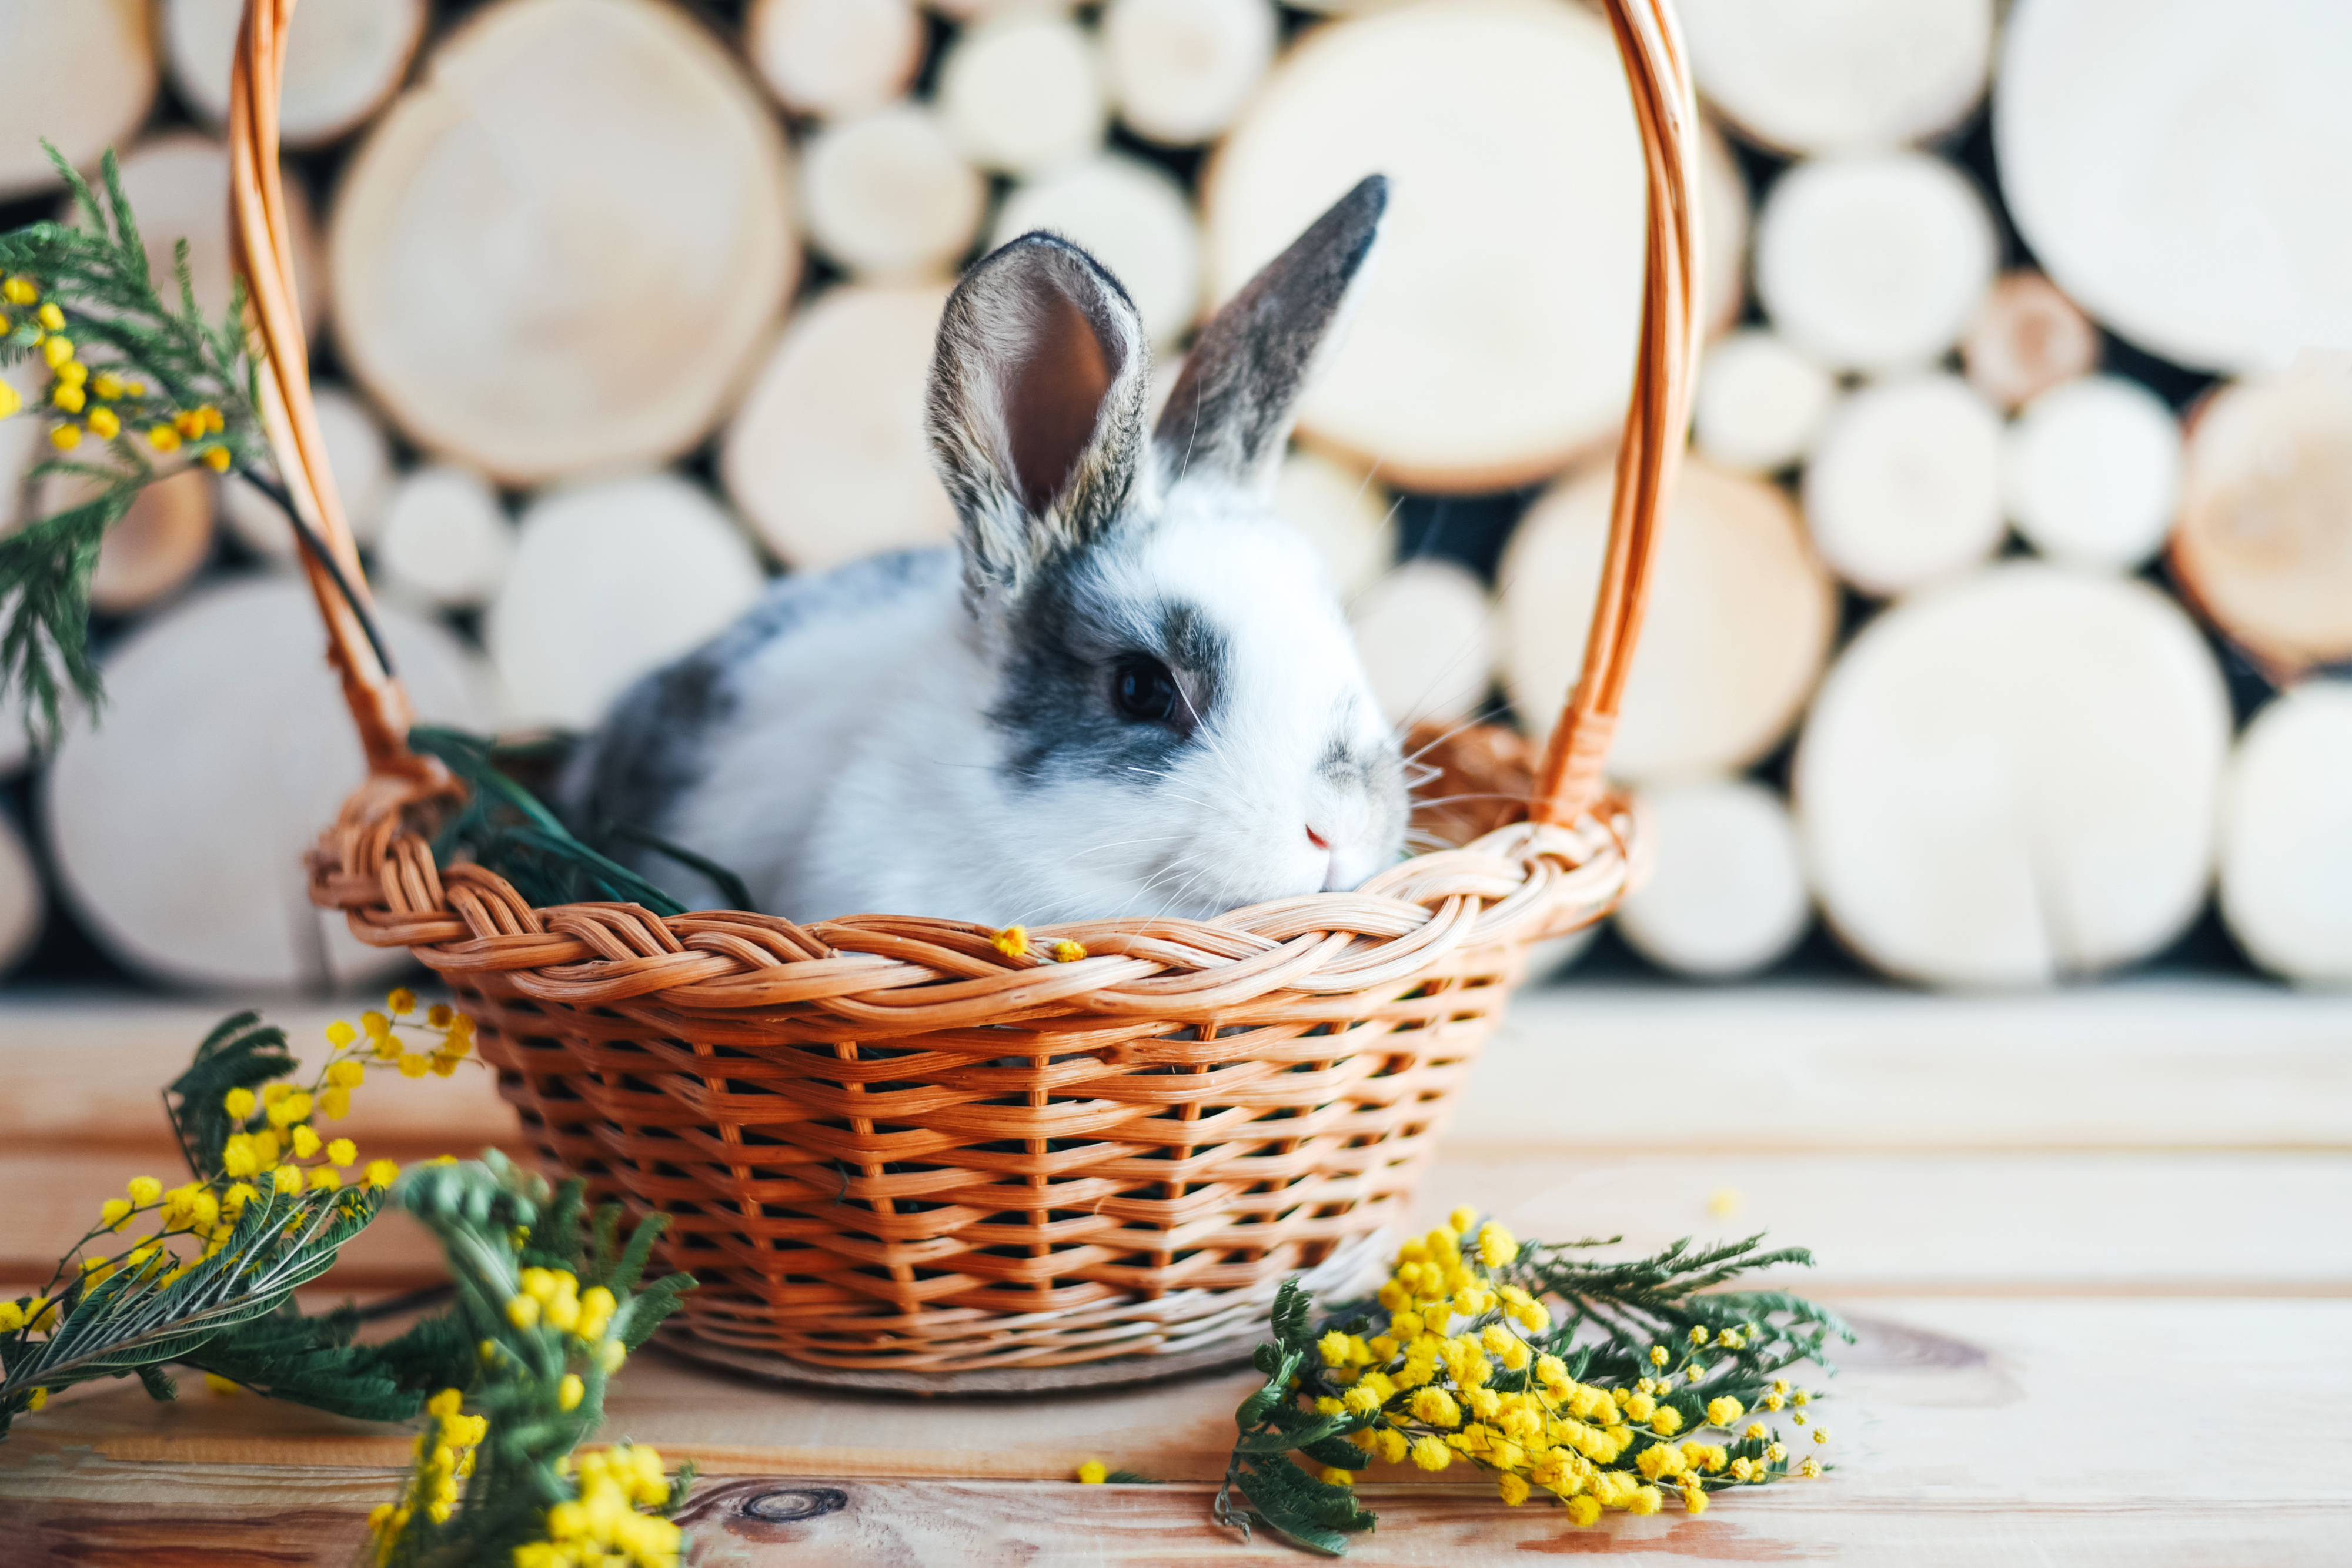 A rabbit is sitting in a wicker basket with yellow flowers around; set against a backdrop of circular wood logs